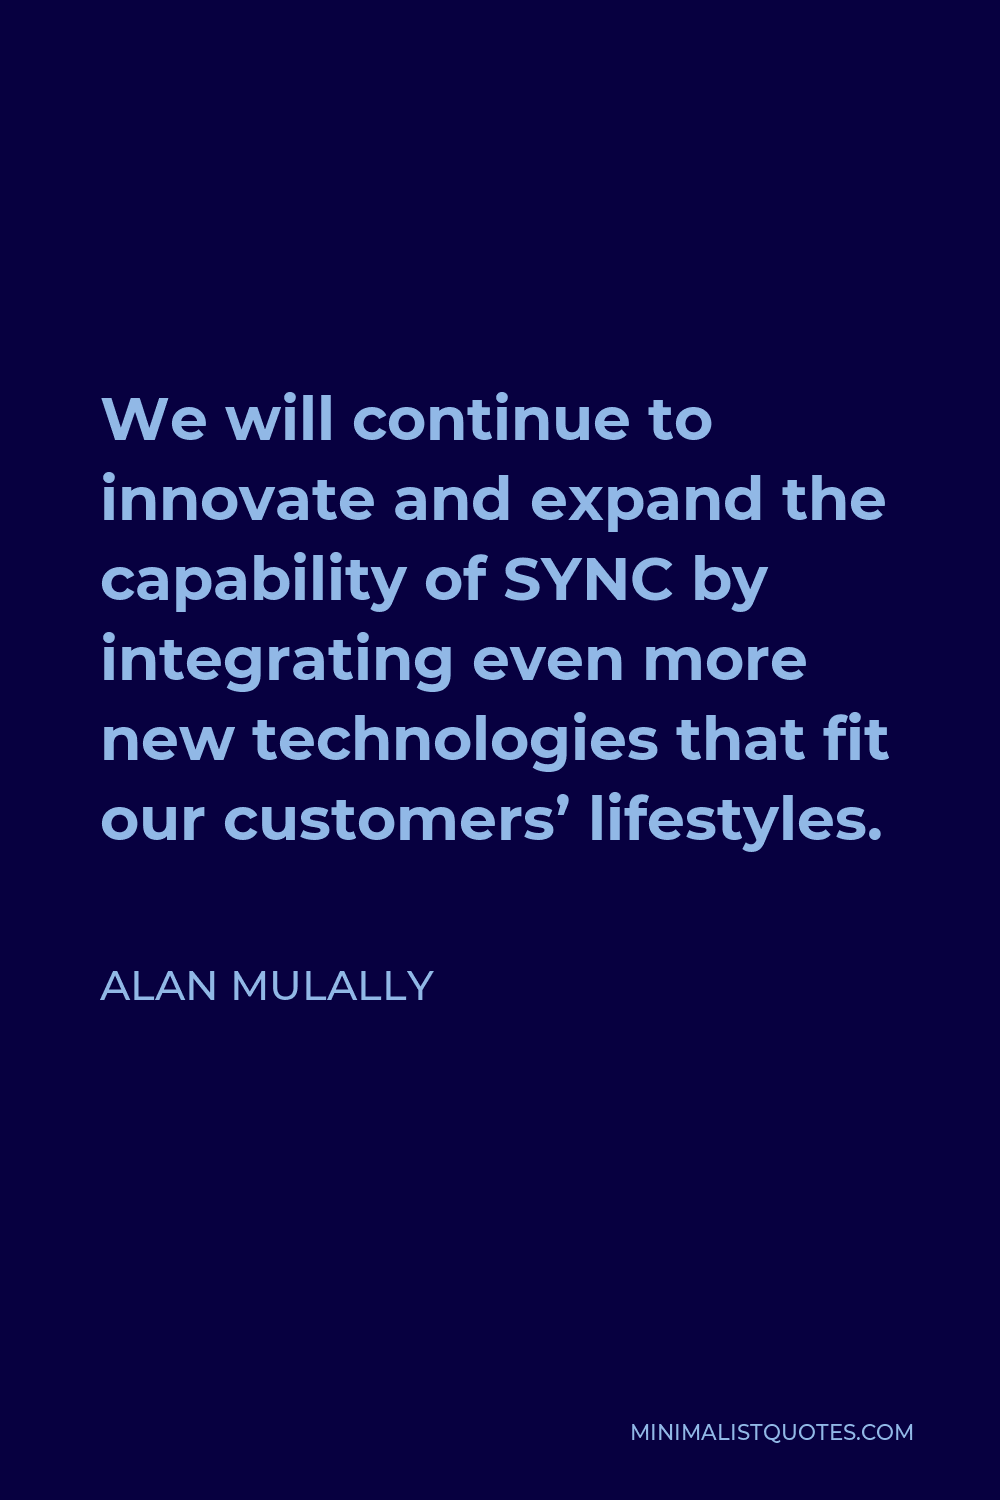 Alan Mulally Quote - We will continue to innovate and expand the capability of SYNC by integrating even more new technologies that fit our customers’ lifestyles.